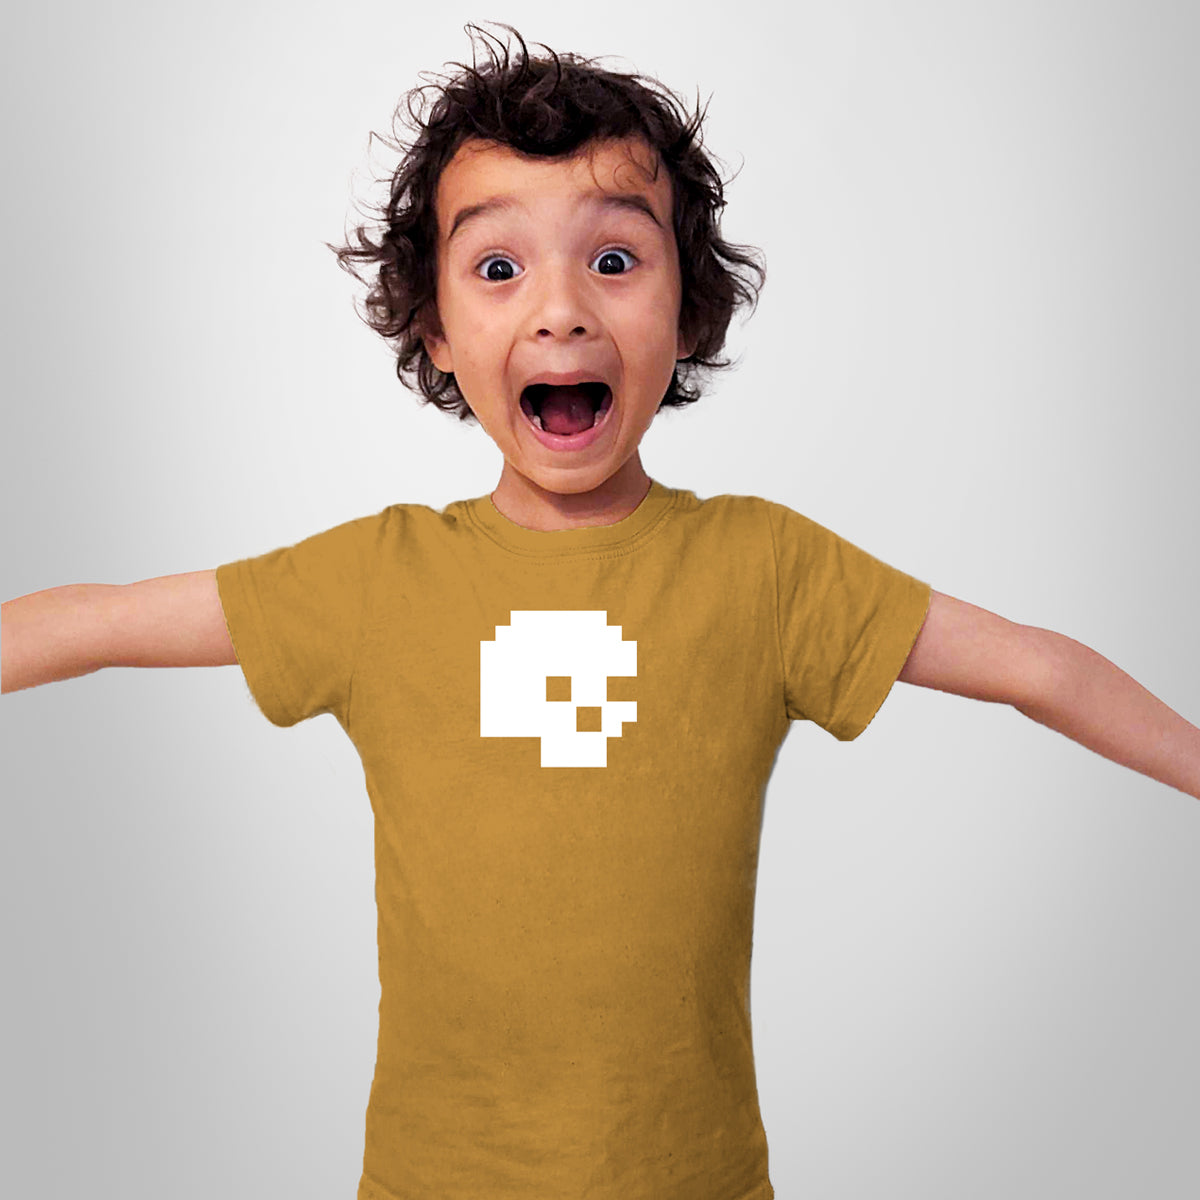 A&S - Pixel Skull Youth Jersey Tee